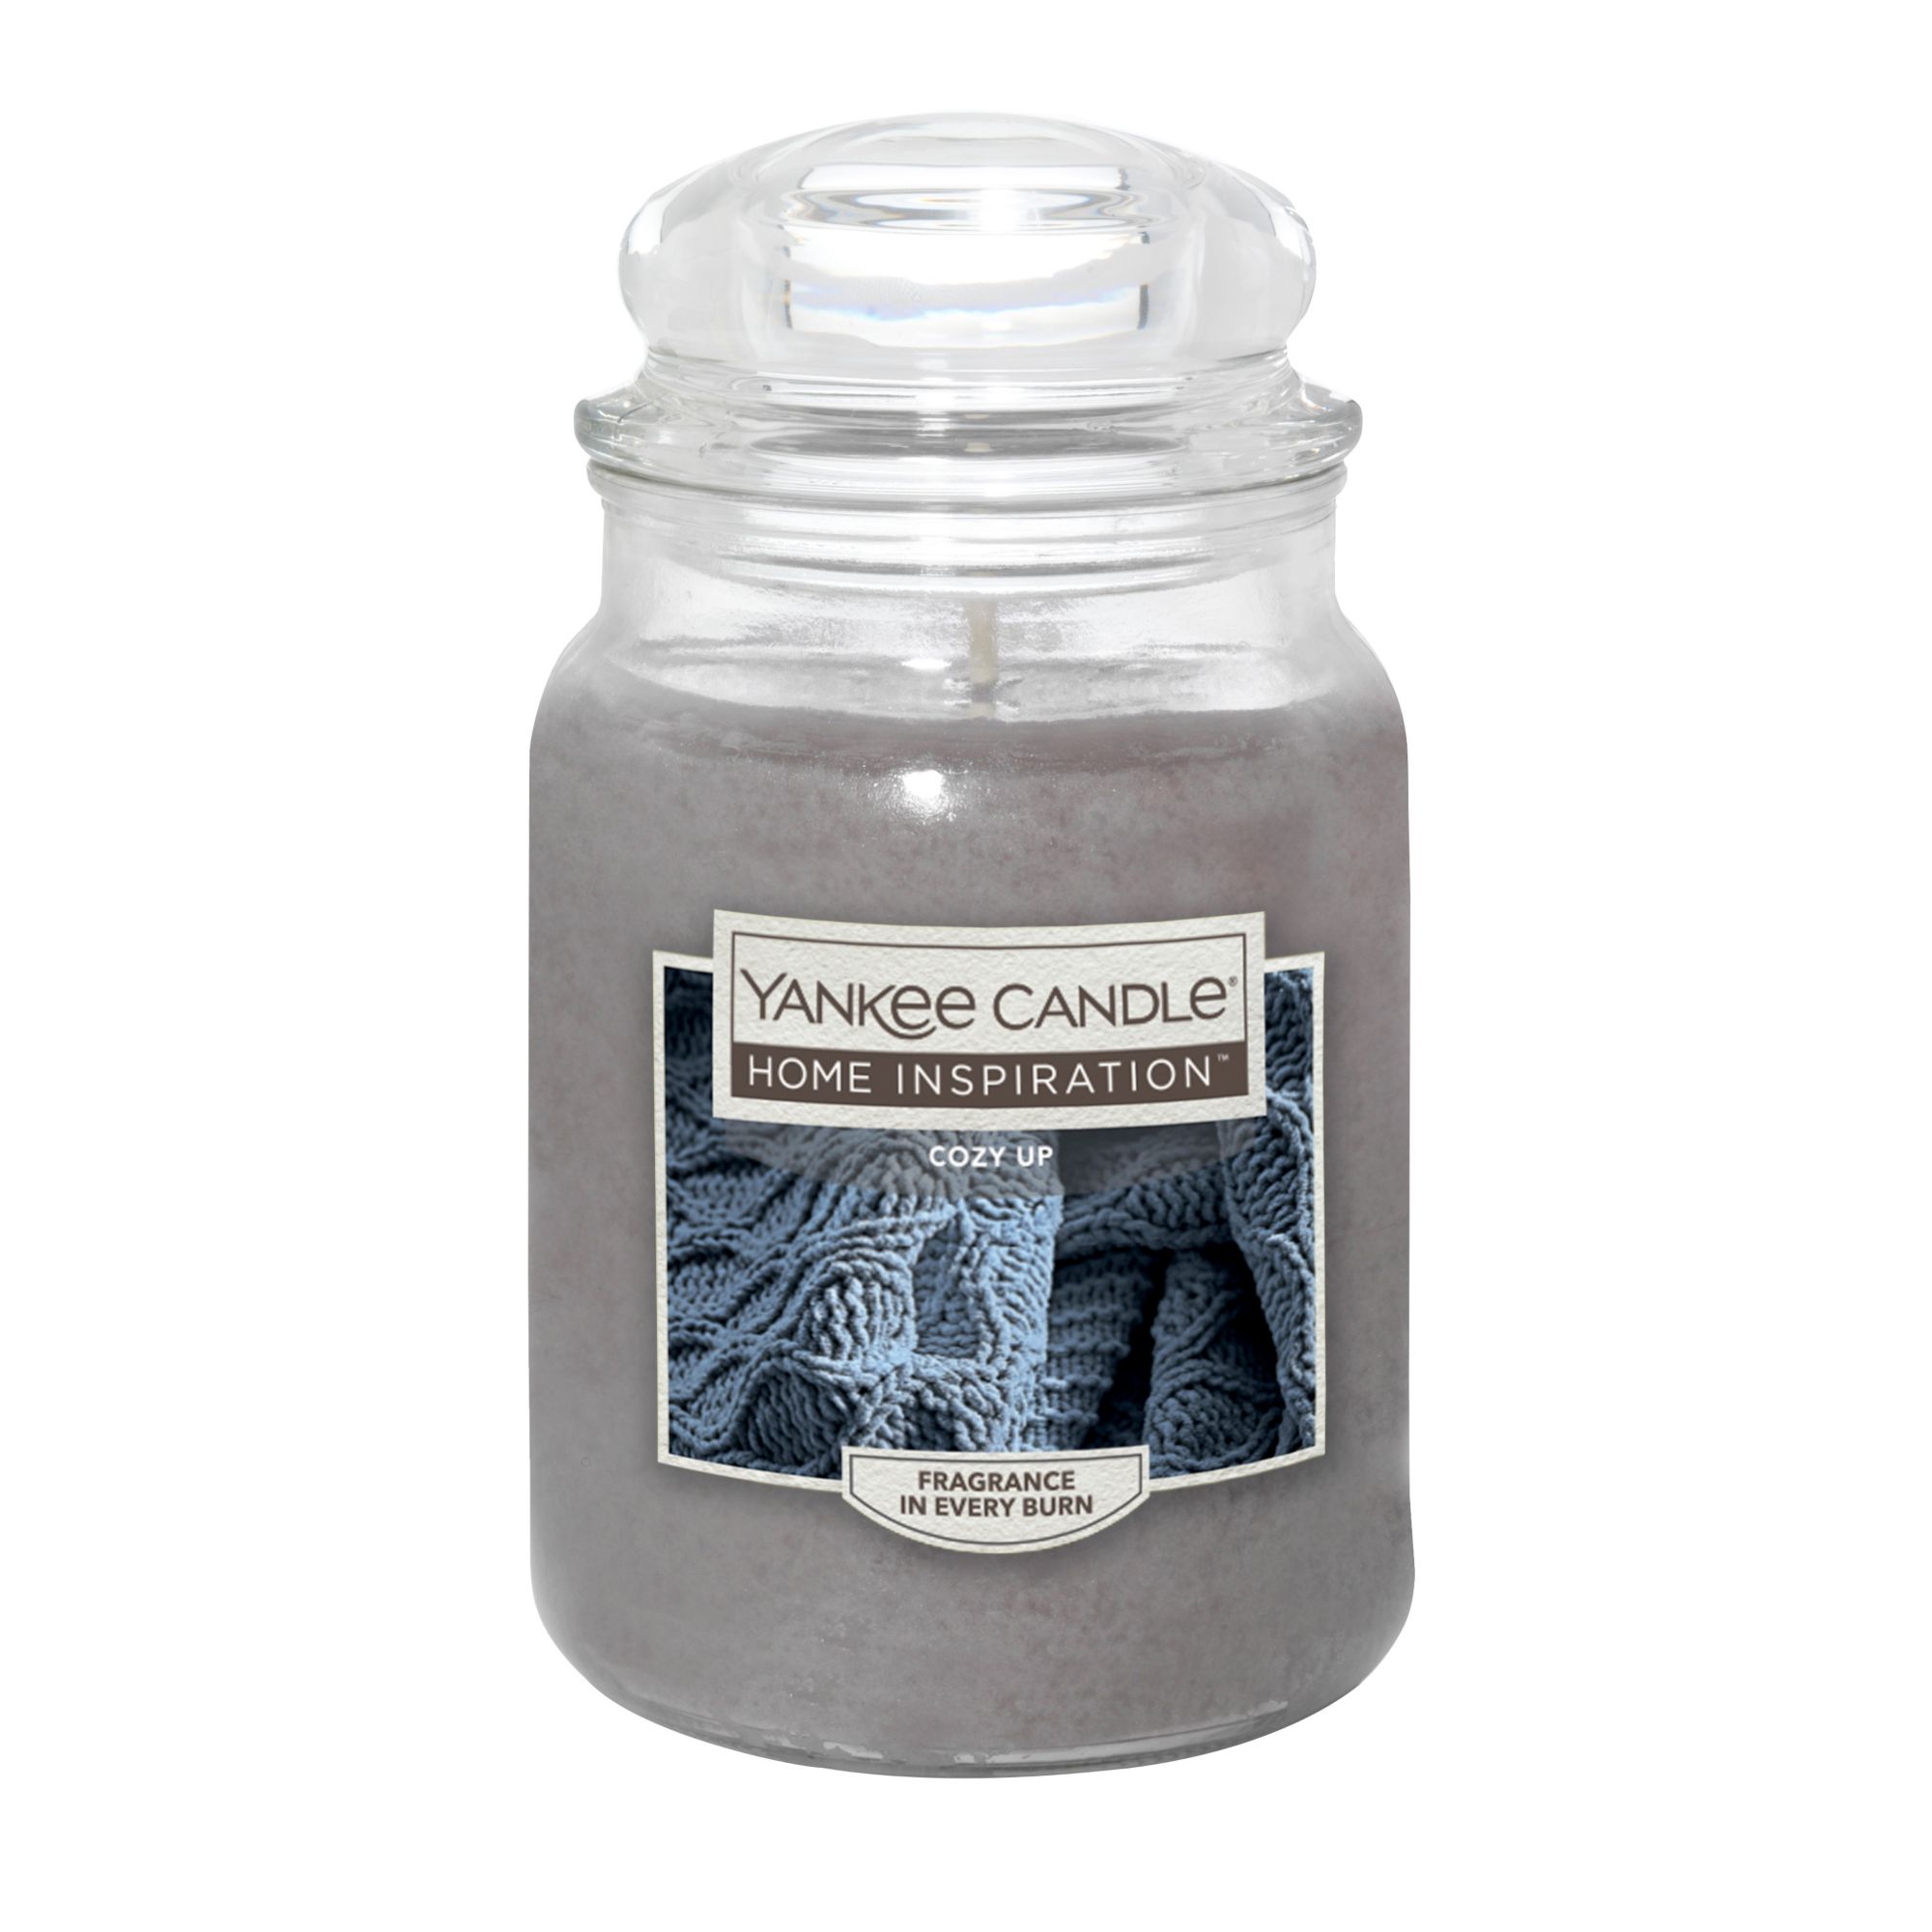 kitchen and households items on Instagram: Yankee candle 3 wax